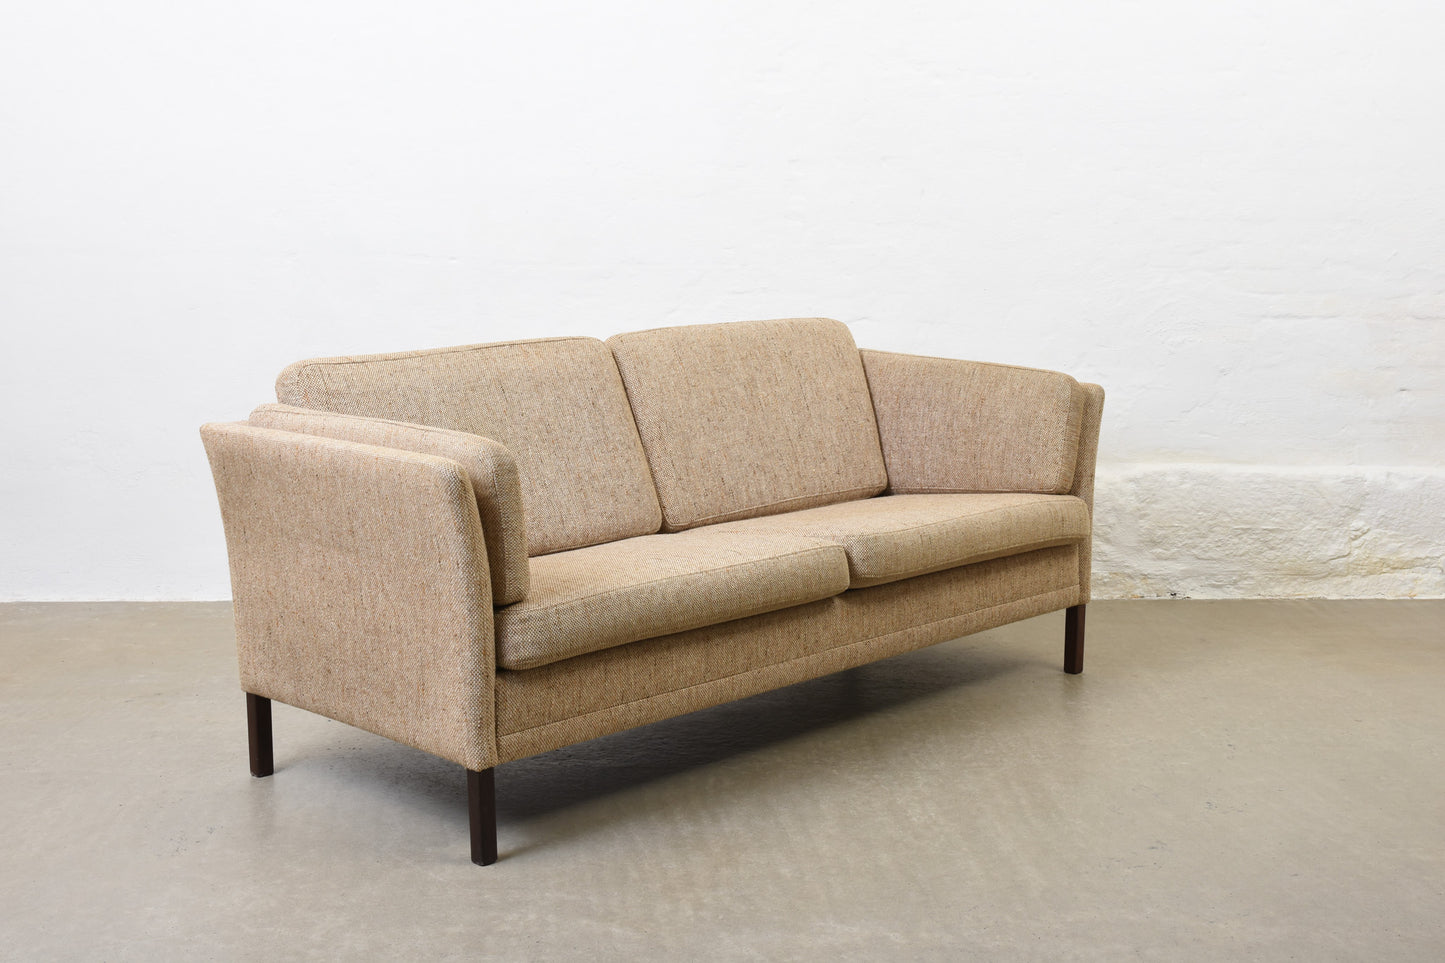 1980s Danish wool two and a half seater